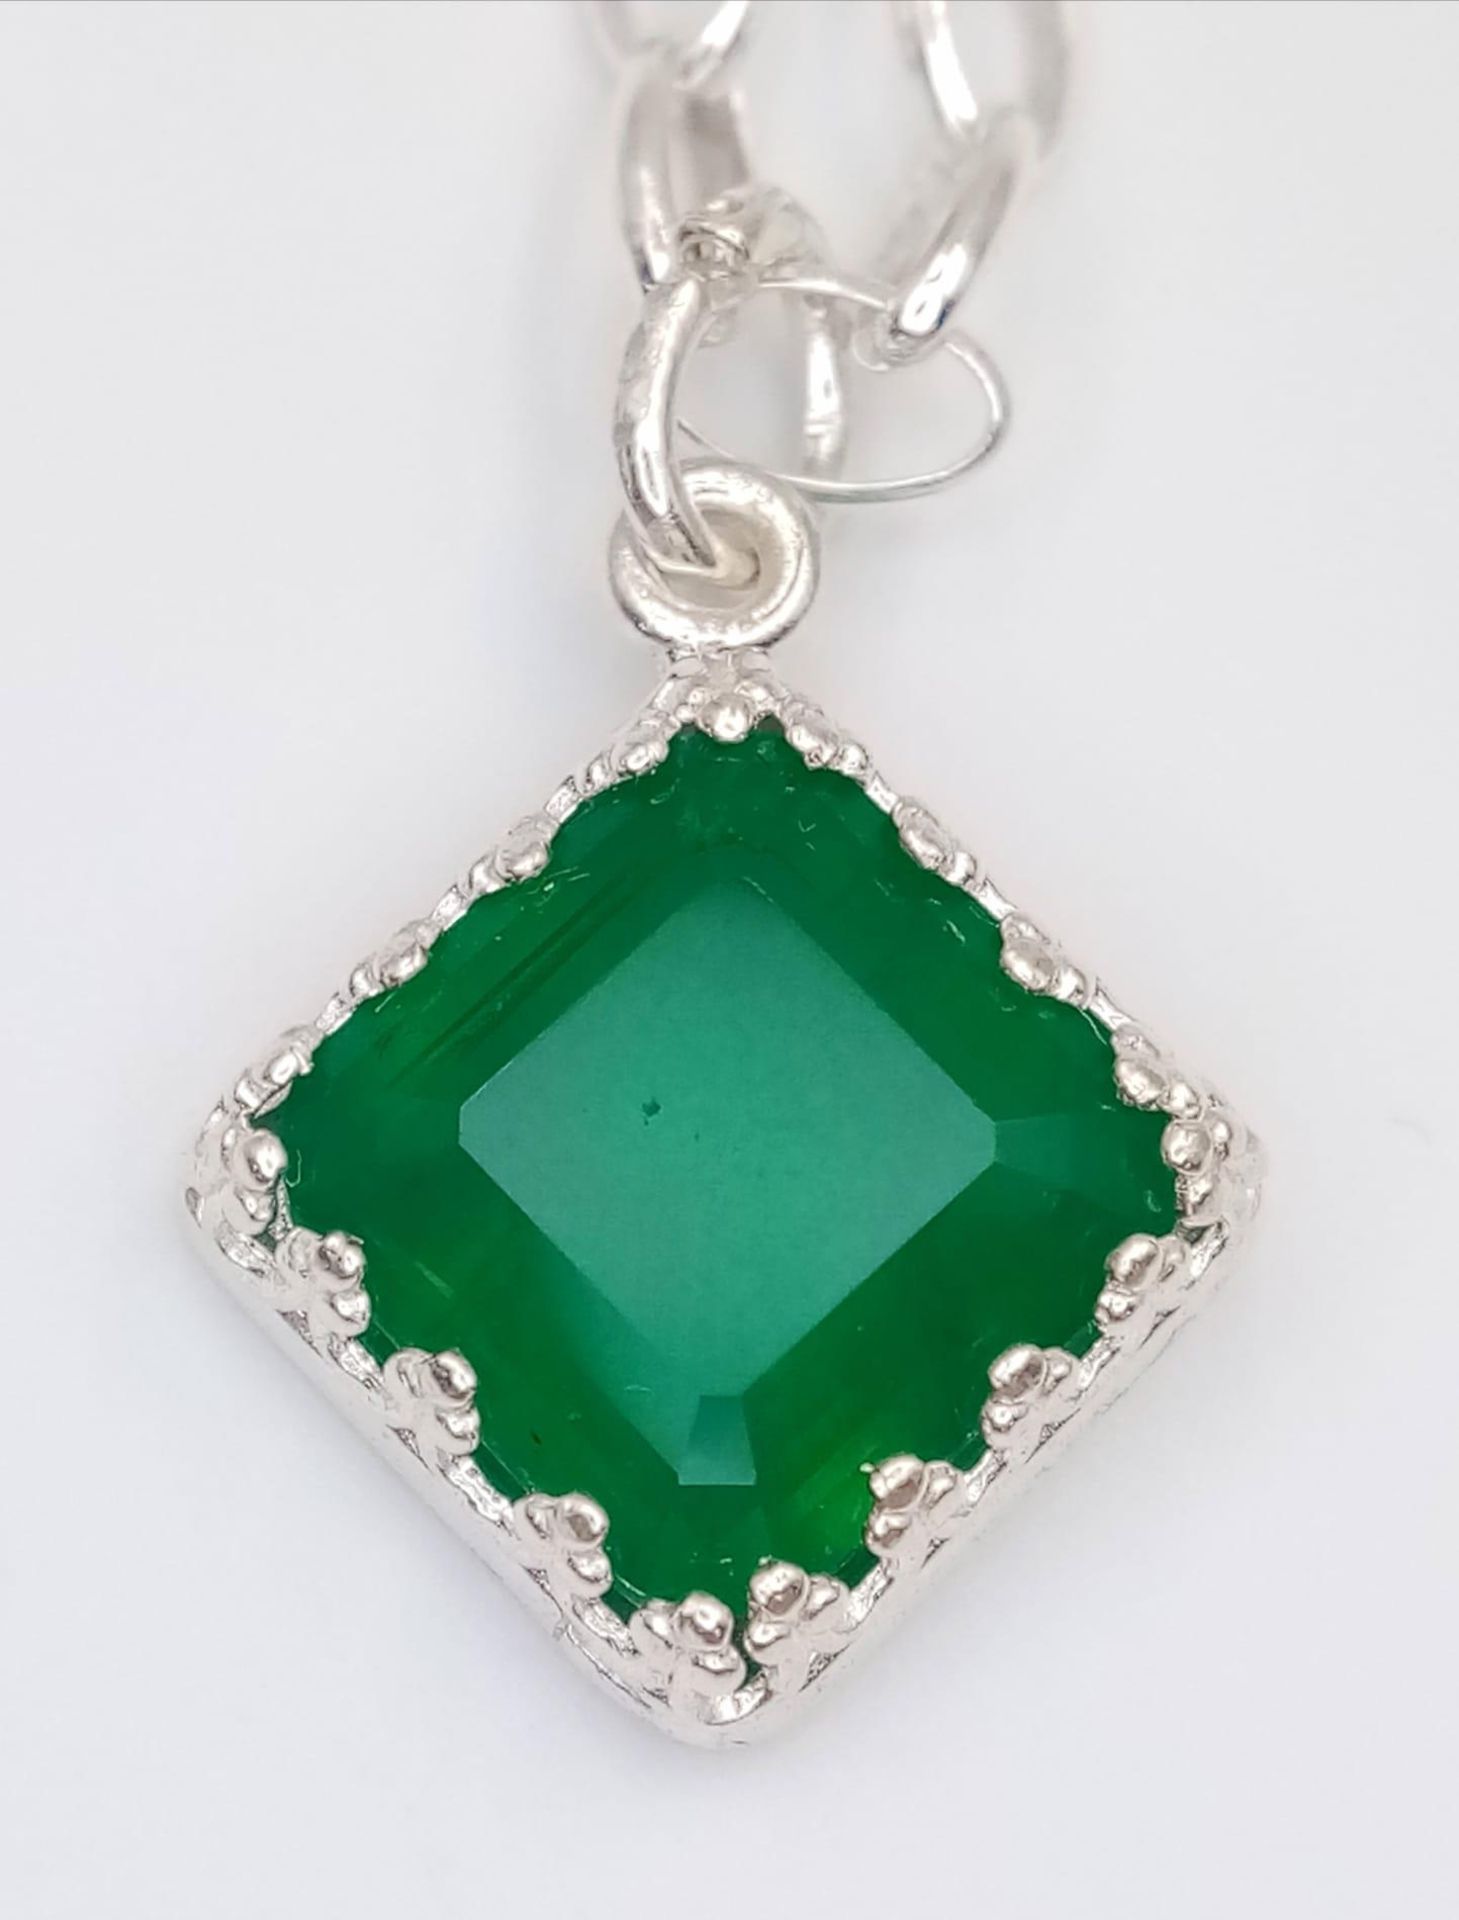 A sterling silver chain necklace with a green stone pendant, chain length: 42 cm, total weight: 6. - Bild 4 aus 6